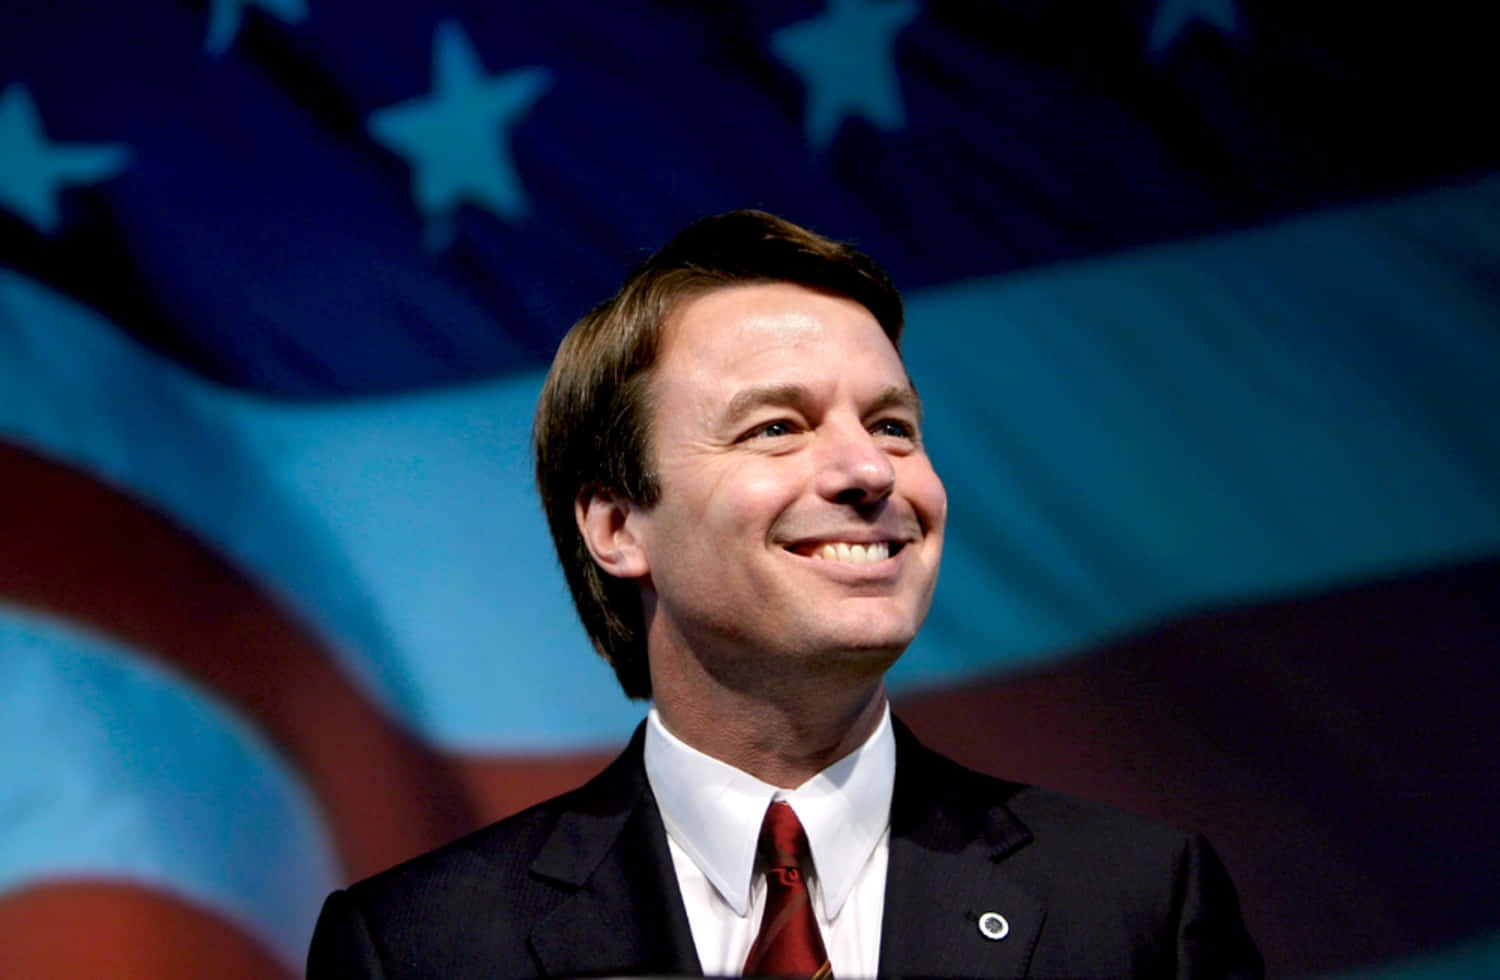 John Edwards Passionately Delivers A Speech At A Campaign Event. Wallpaper